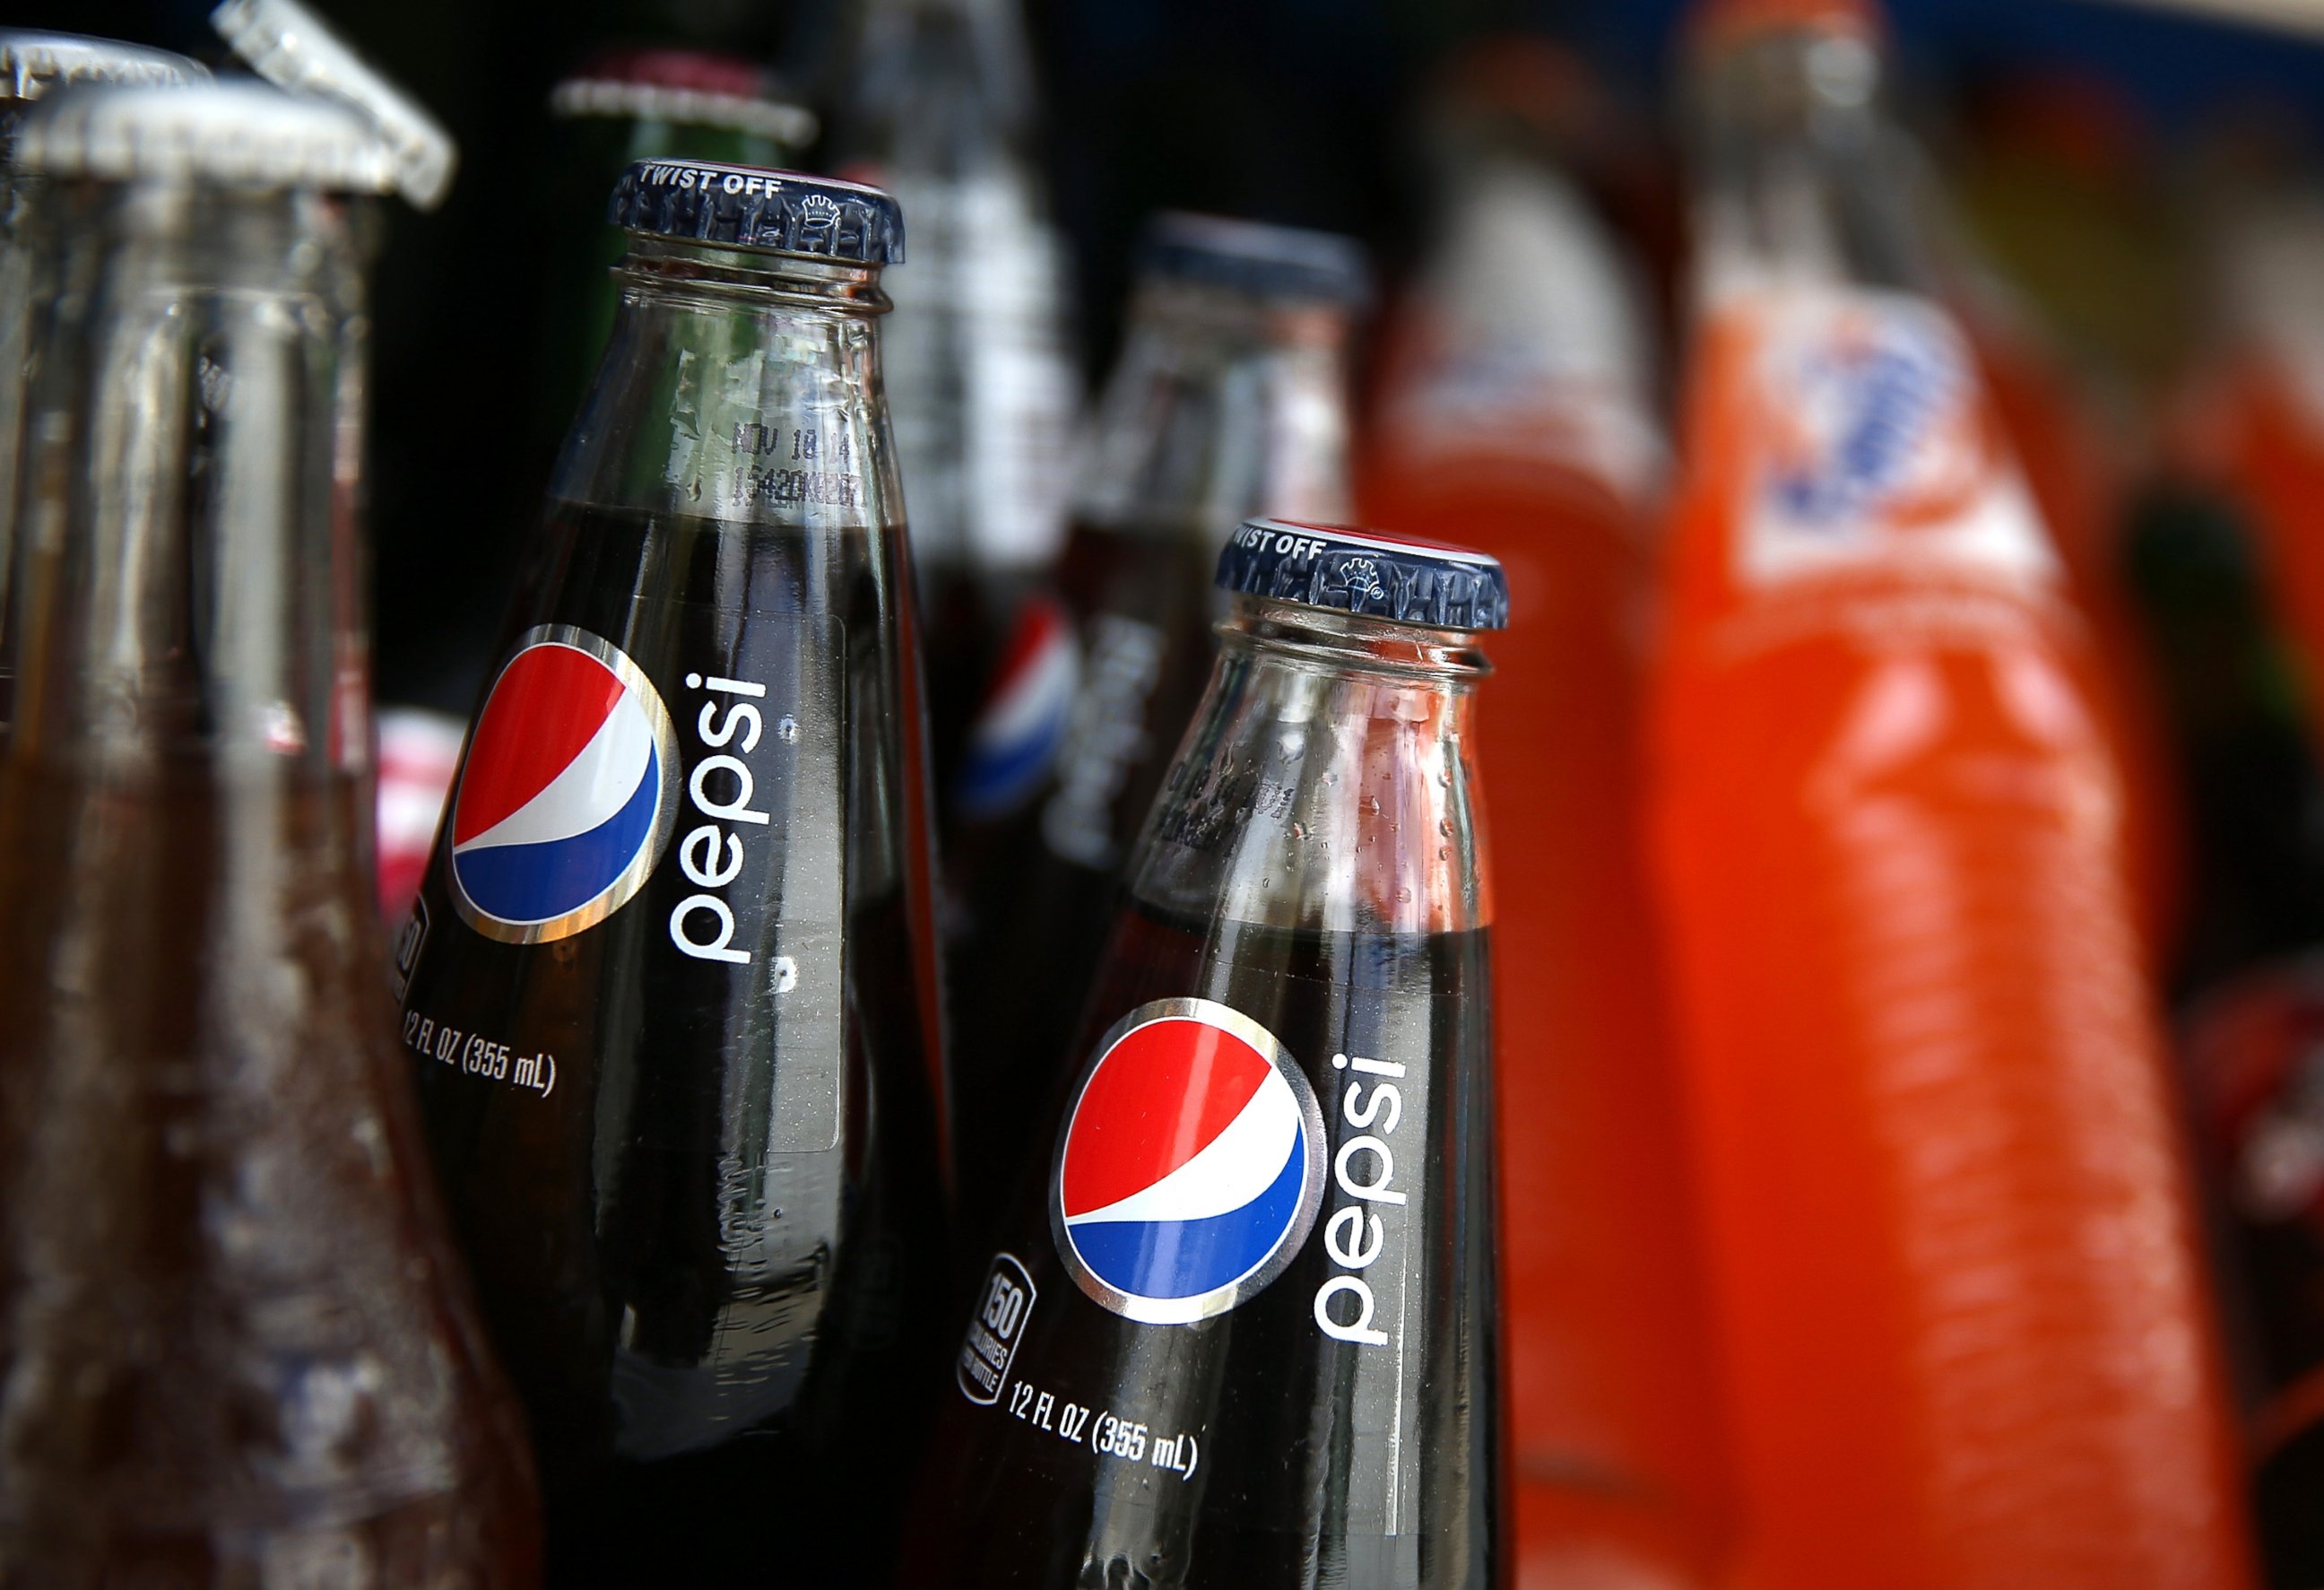 PHOTO: Bottles of Pepsi are displayed in a food truck's cooler in San Francisco, July 22, 2014.